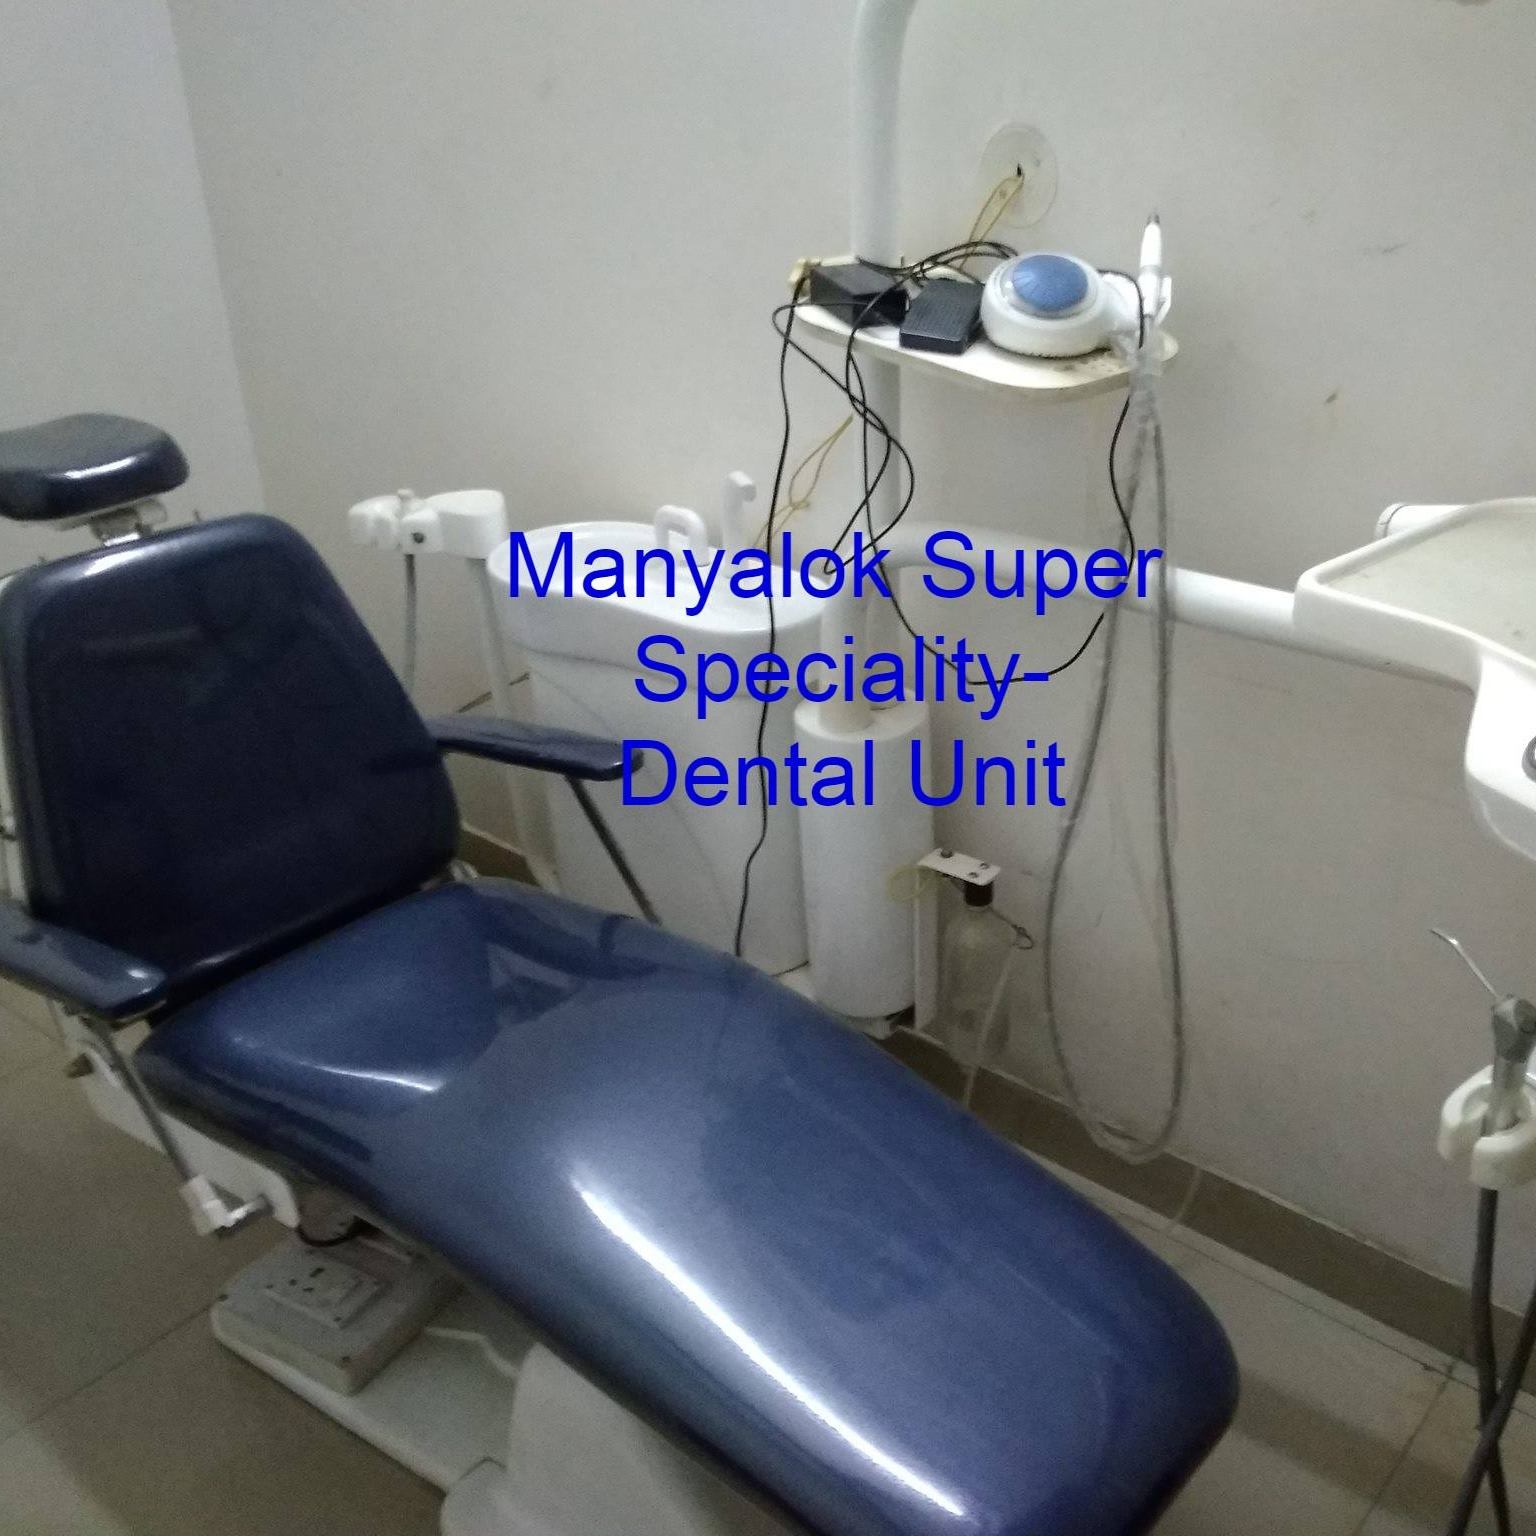 Manyalok Superspeciality - Orthodontics Implant & Pediatric Dentistry|Diagnostic centre|Medical Services